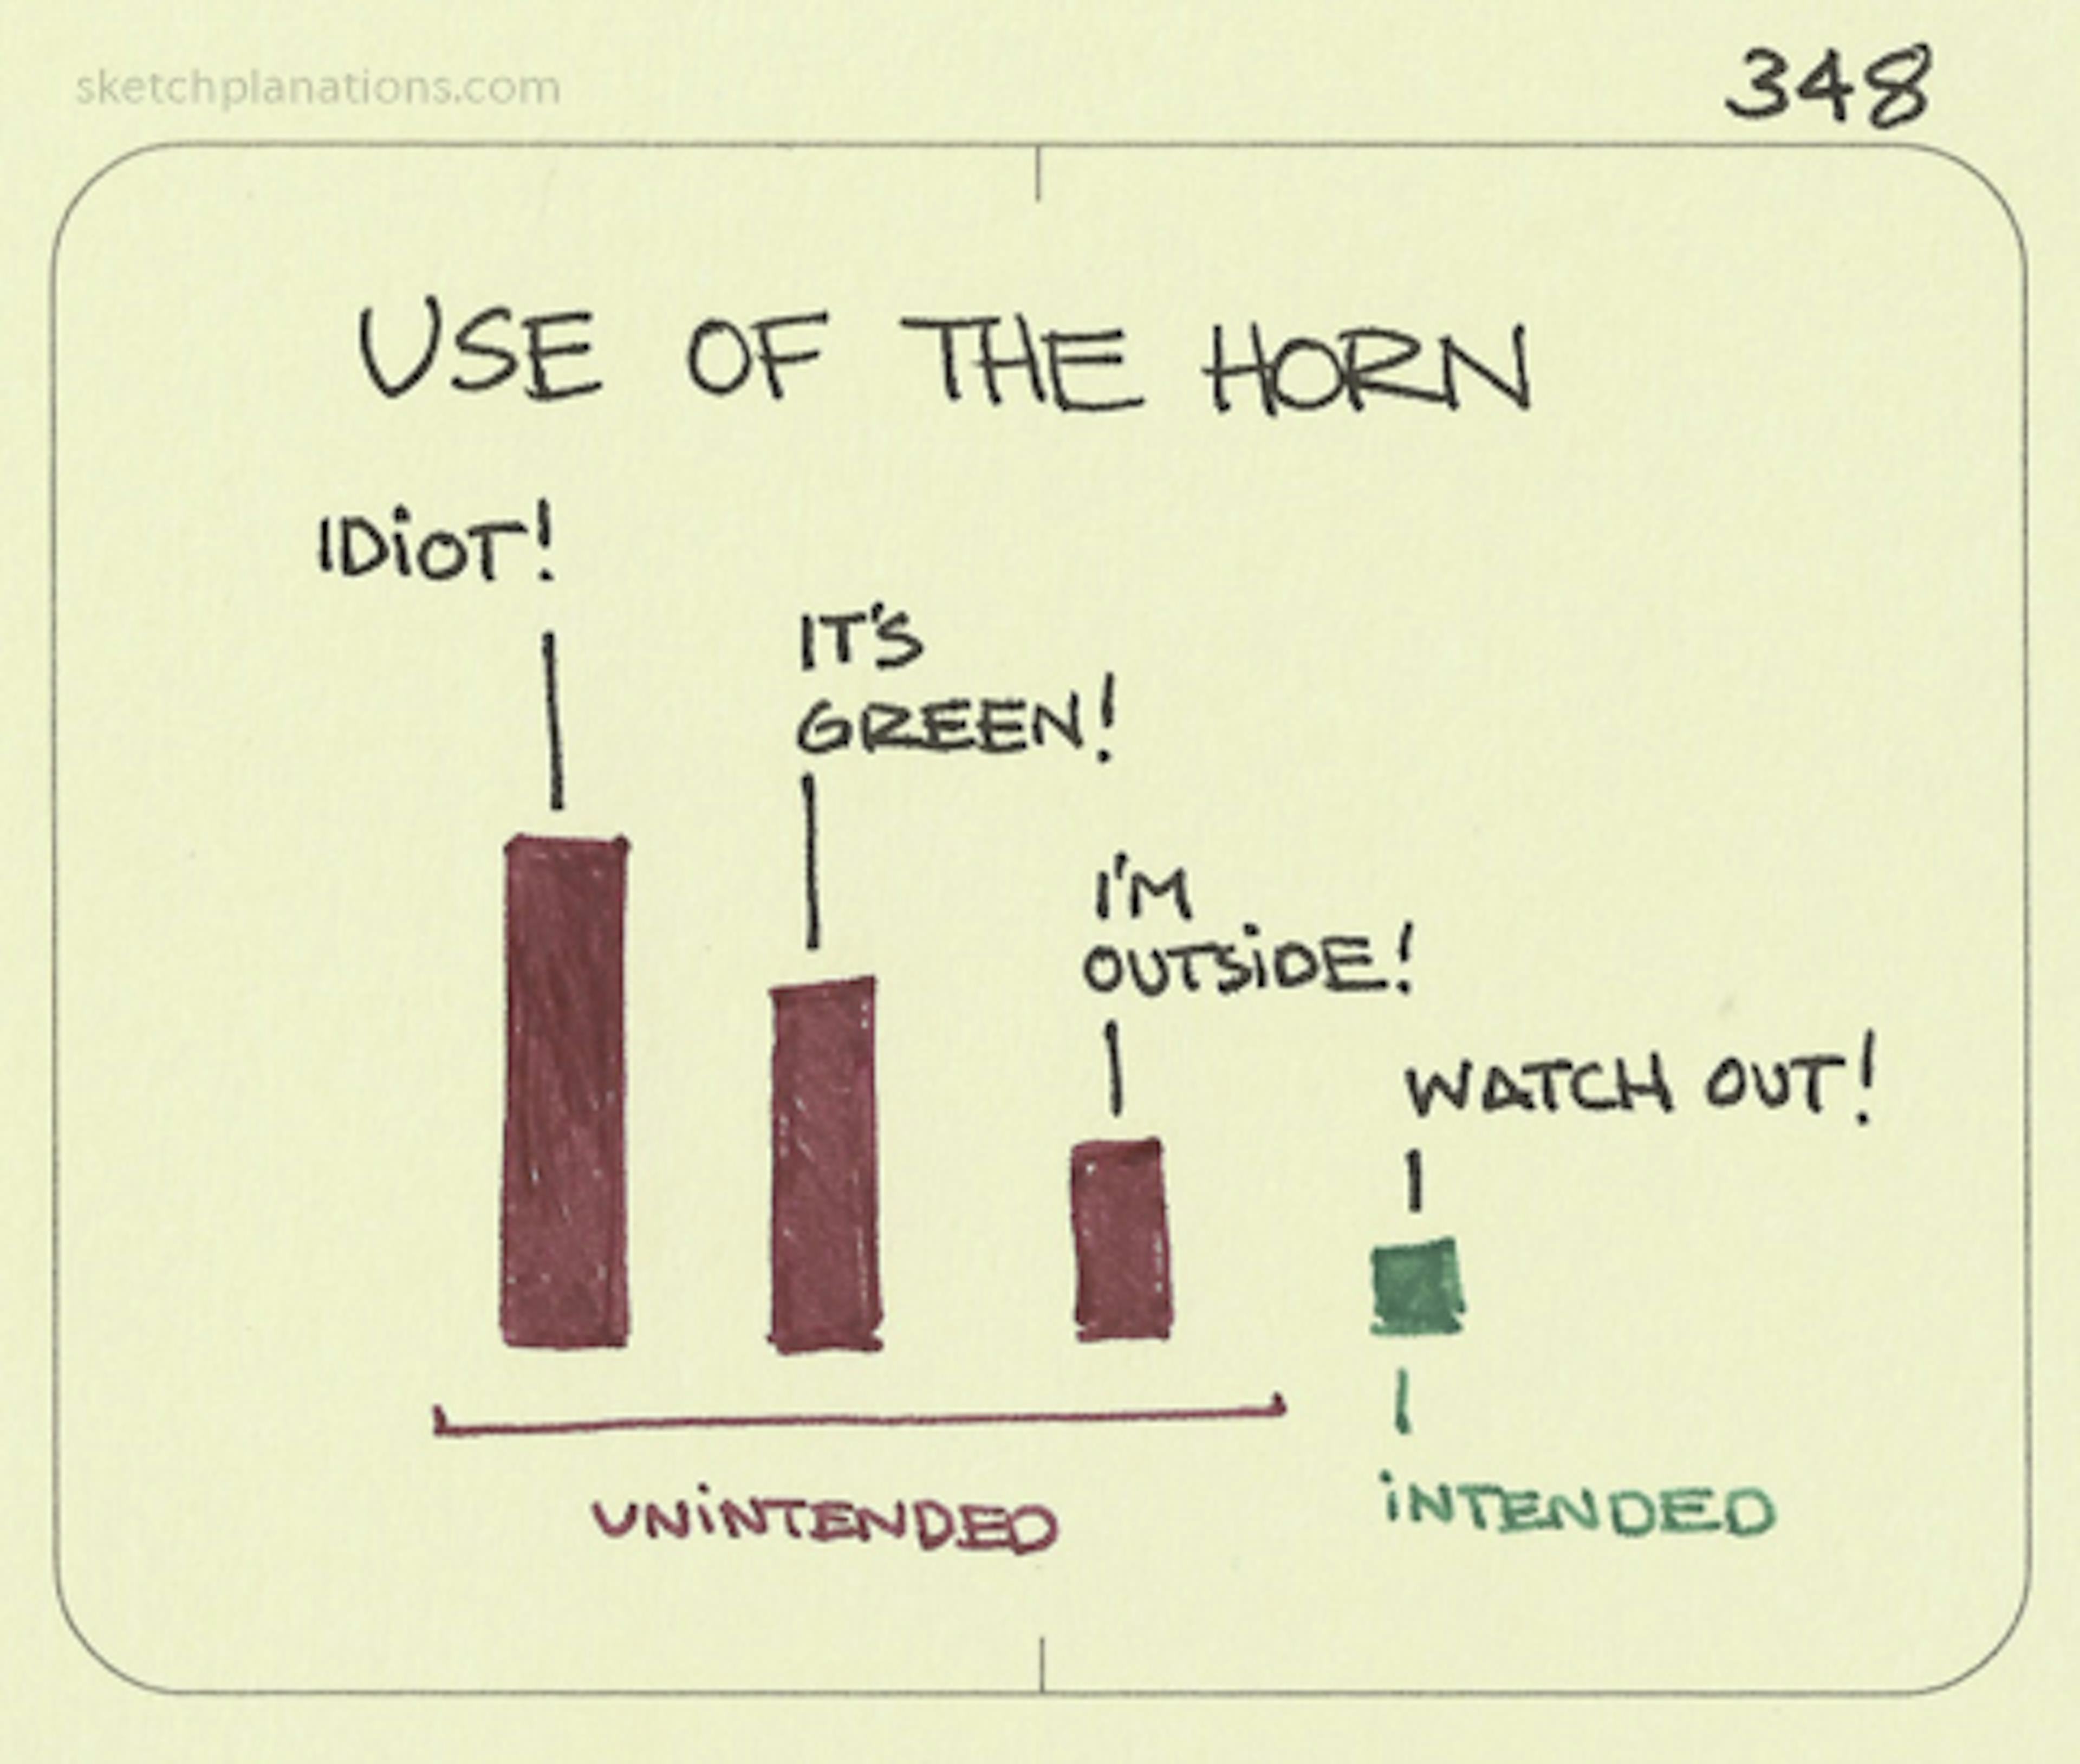 Use of the car horn chart showing the uses in decreasing order of "Idiot!", "It's green!", "I'm outside!", and, lastly, the intended "Watch out!"